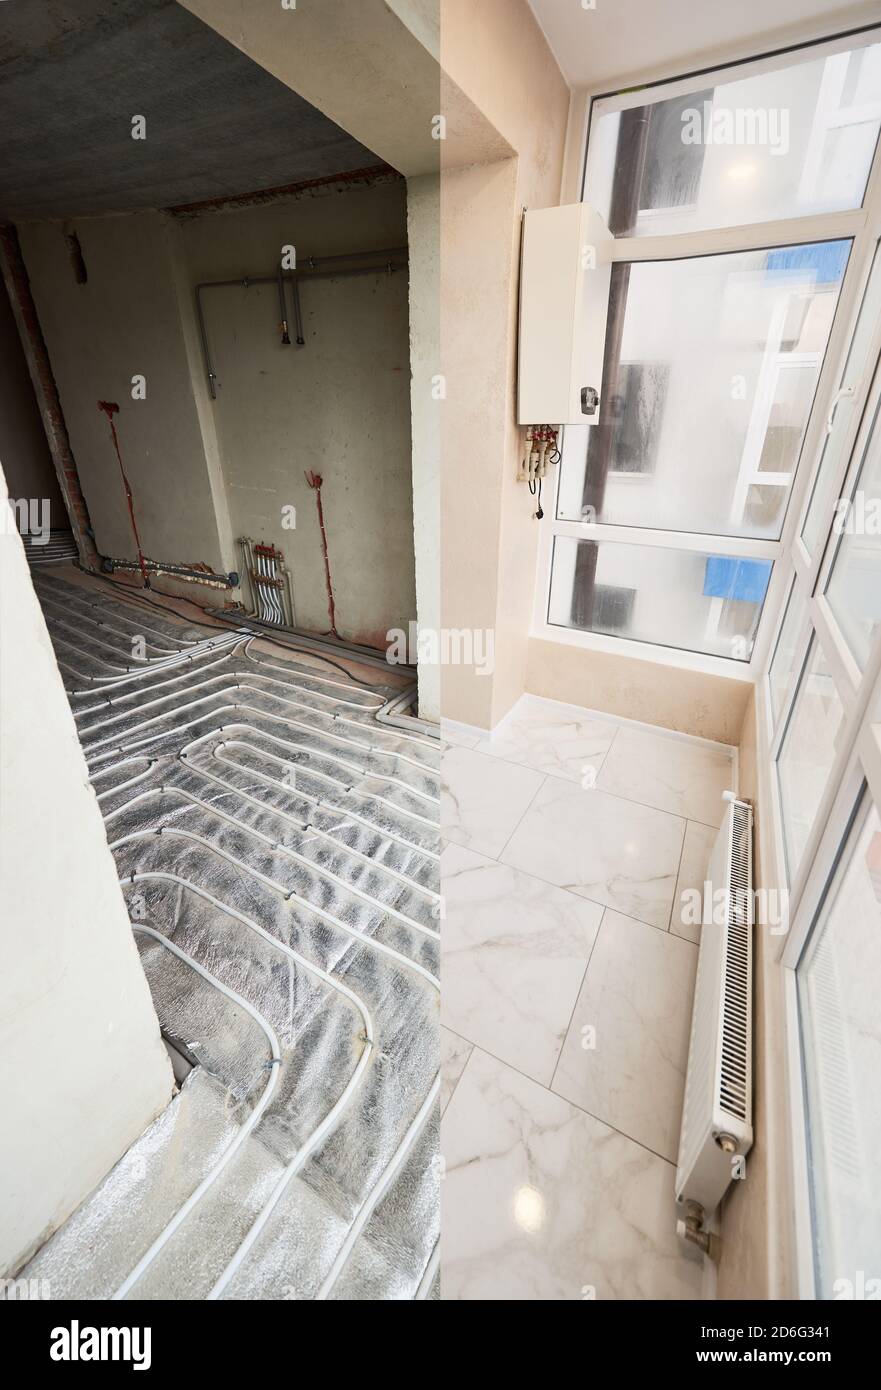 Comparison of old room with underfloor heating pipes and new renovated place with plastic window and marble floor. Modern apartment before and after renovation. Concept of home refurbishment. Stock Photo